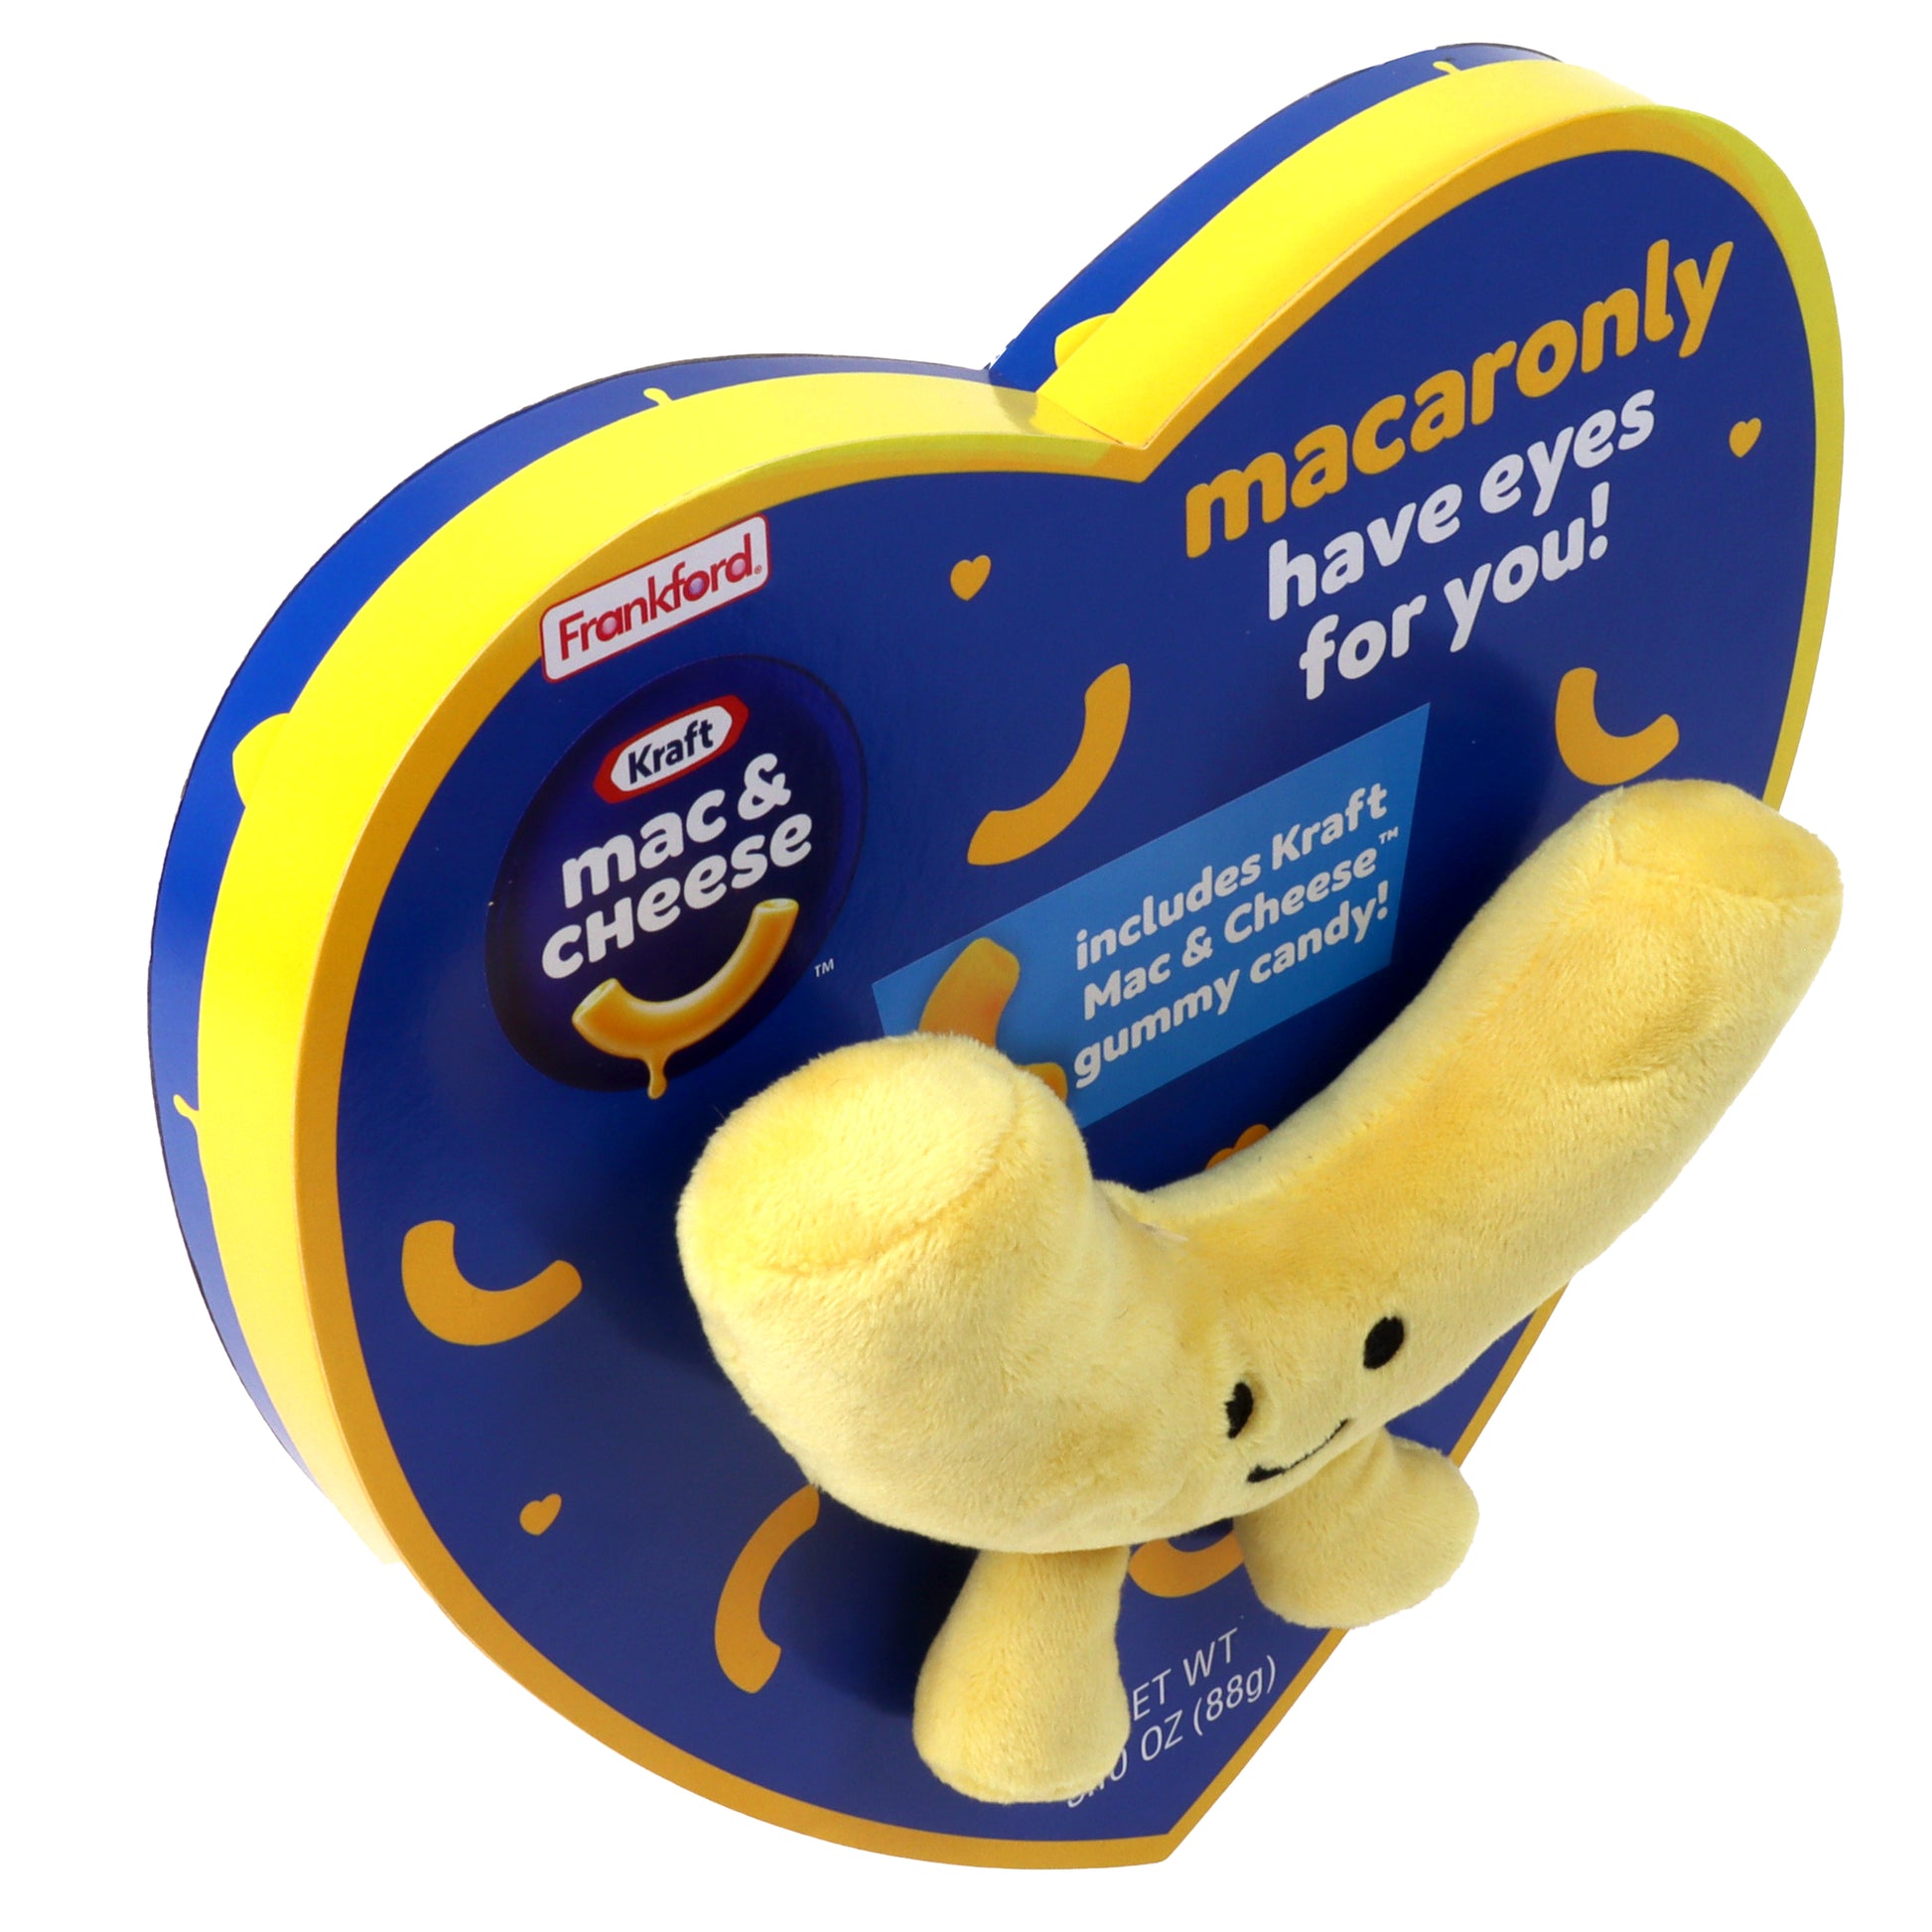 top angle of blue heart shaped box with a yellow border with a mac and cheese shaped plush toy on the front